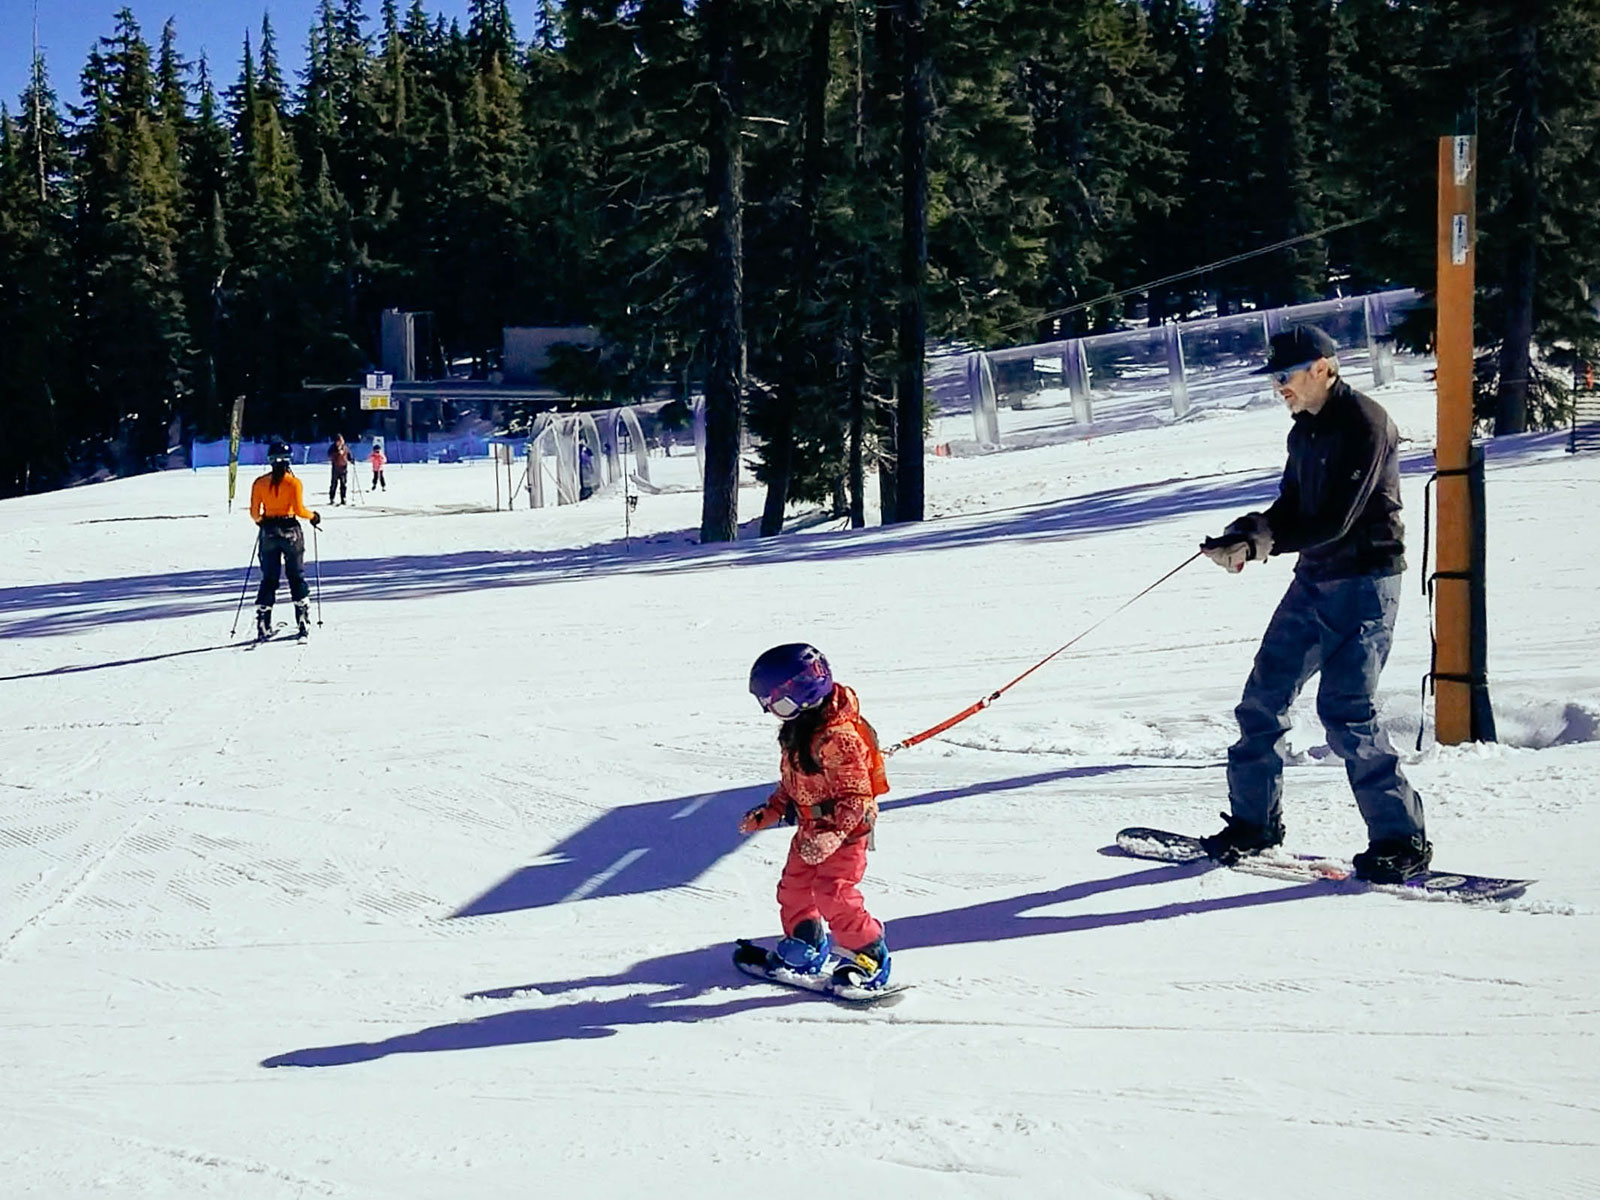 Dad using a backpack harness to guide his toddler down the mountain on a snowboard